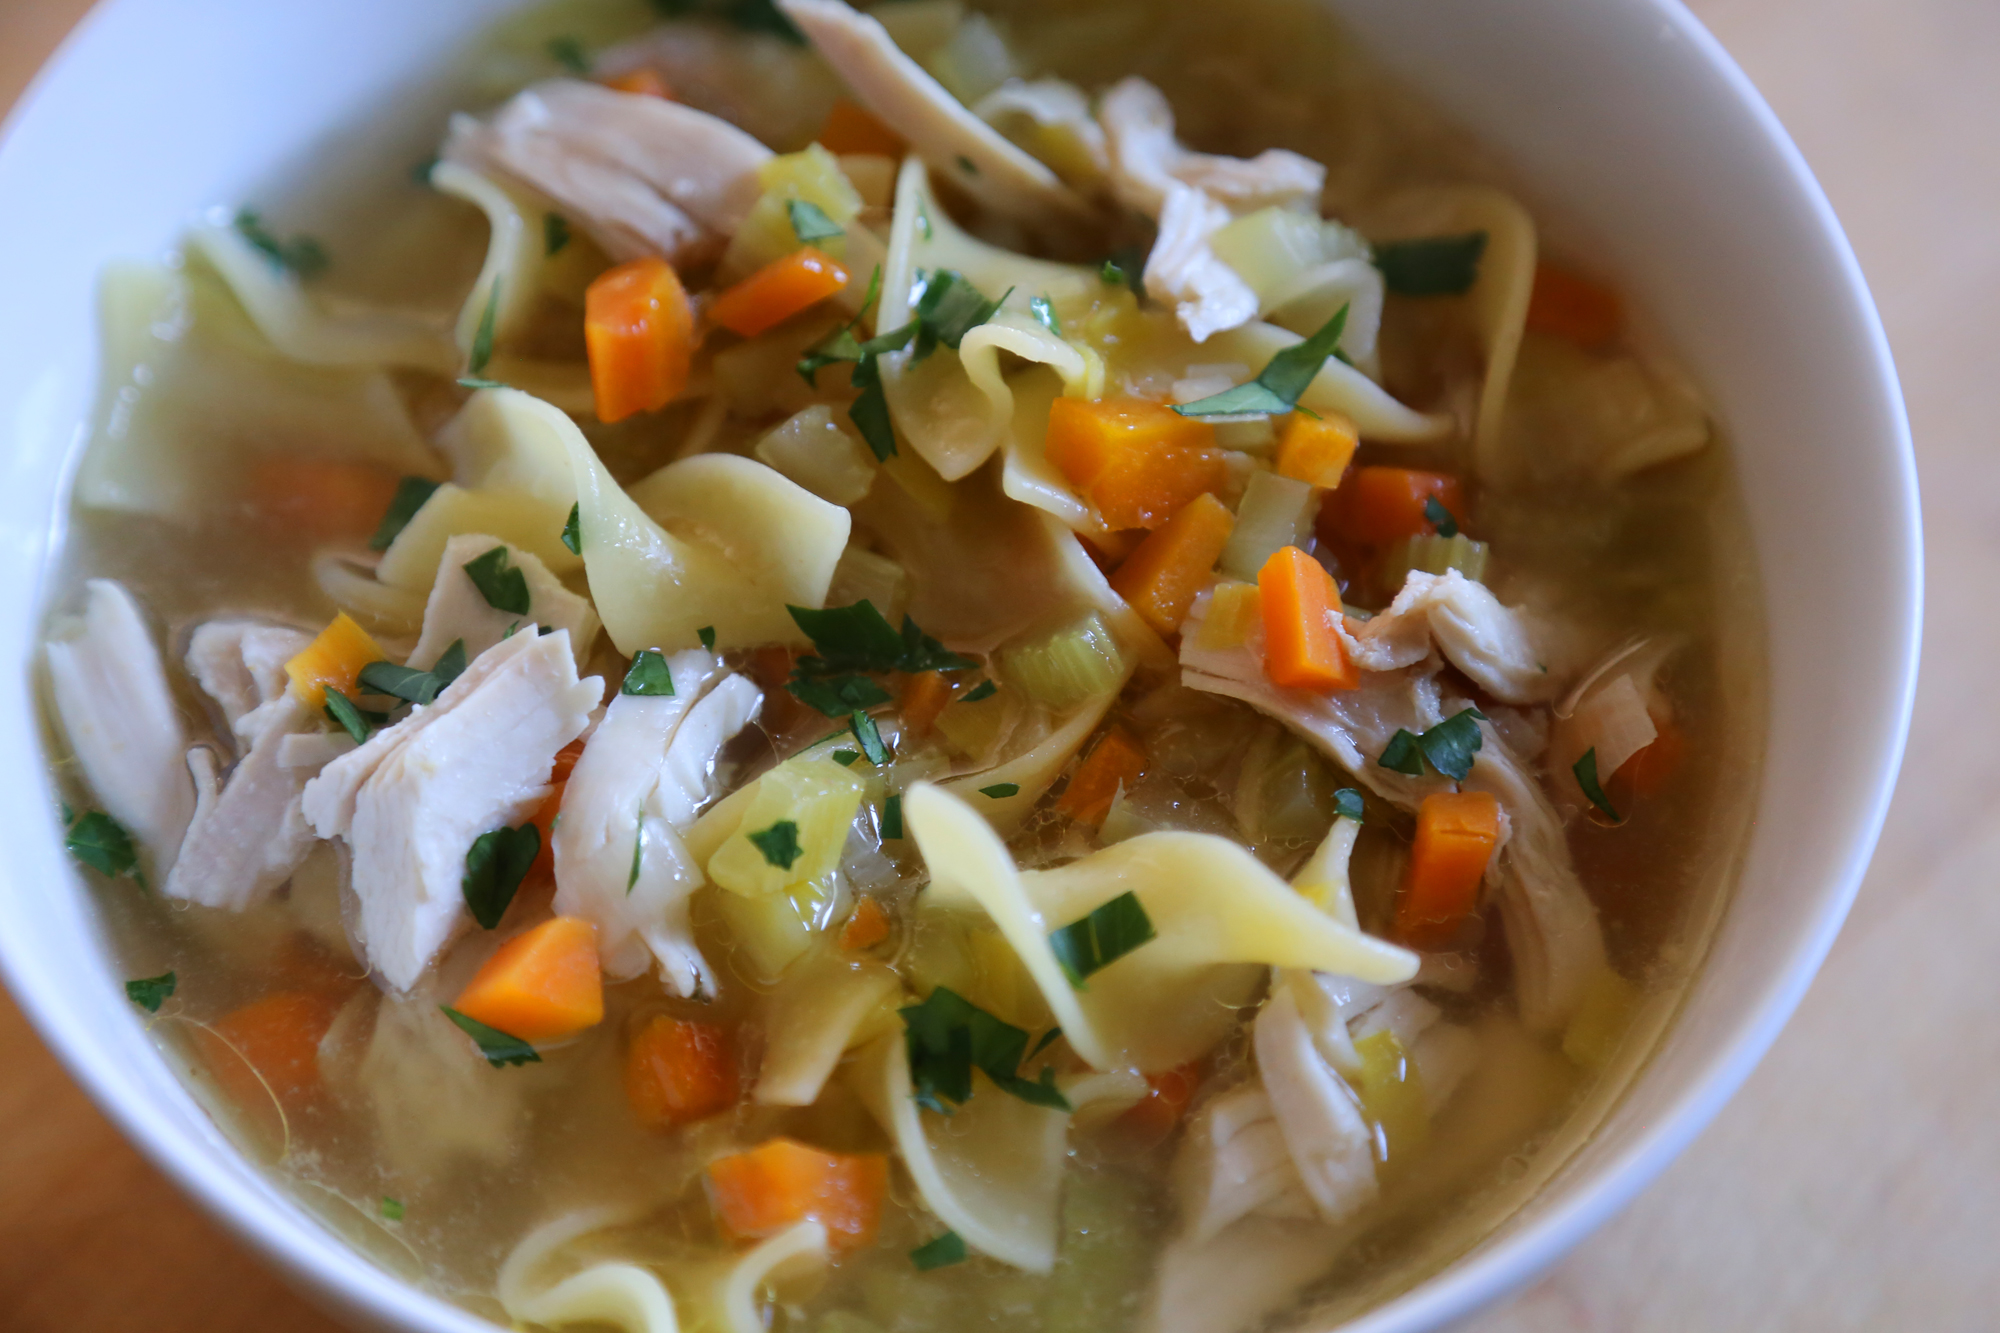 Use the stock to make homemade Chicken Noodle Soup.